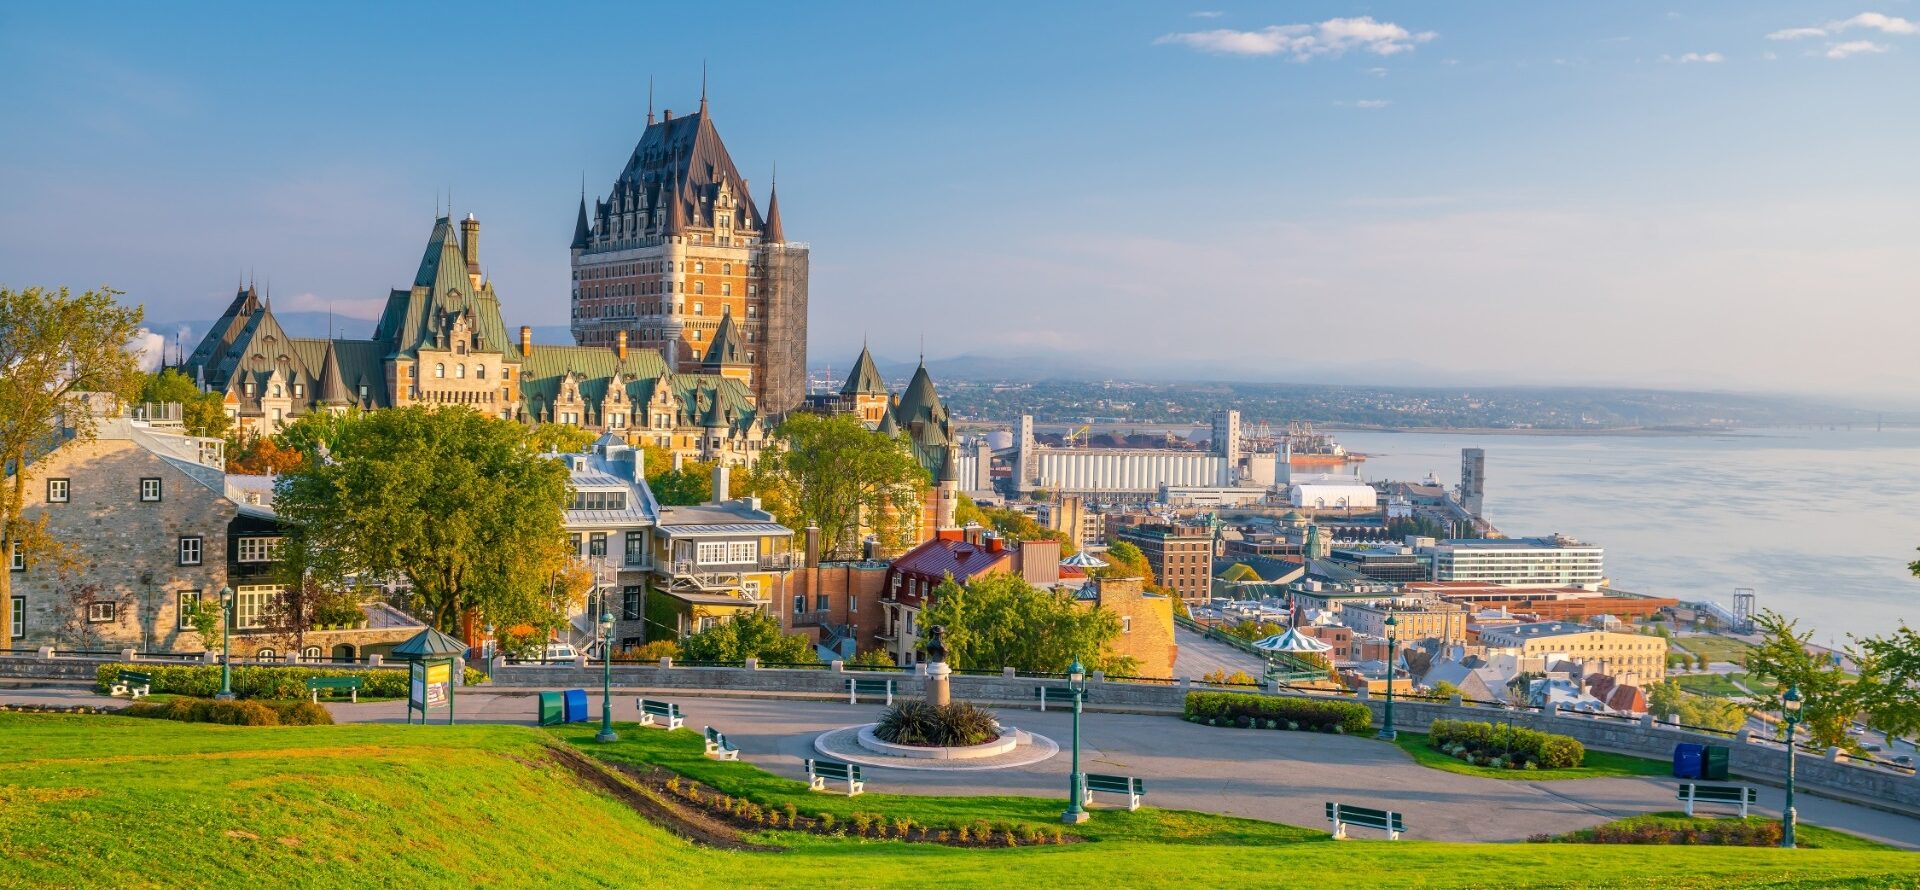 13 Best Things to Do in Quebec City | Celebrity Cruises